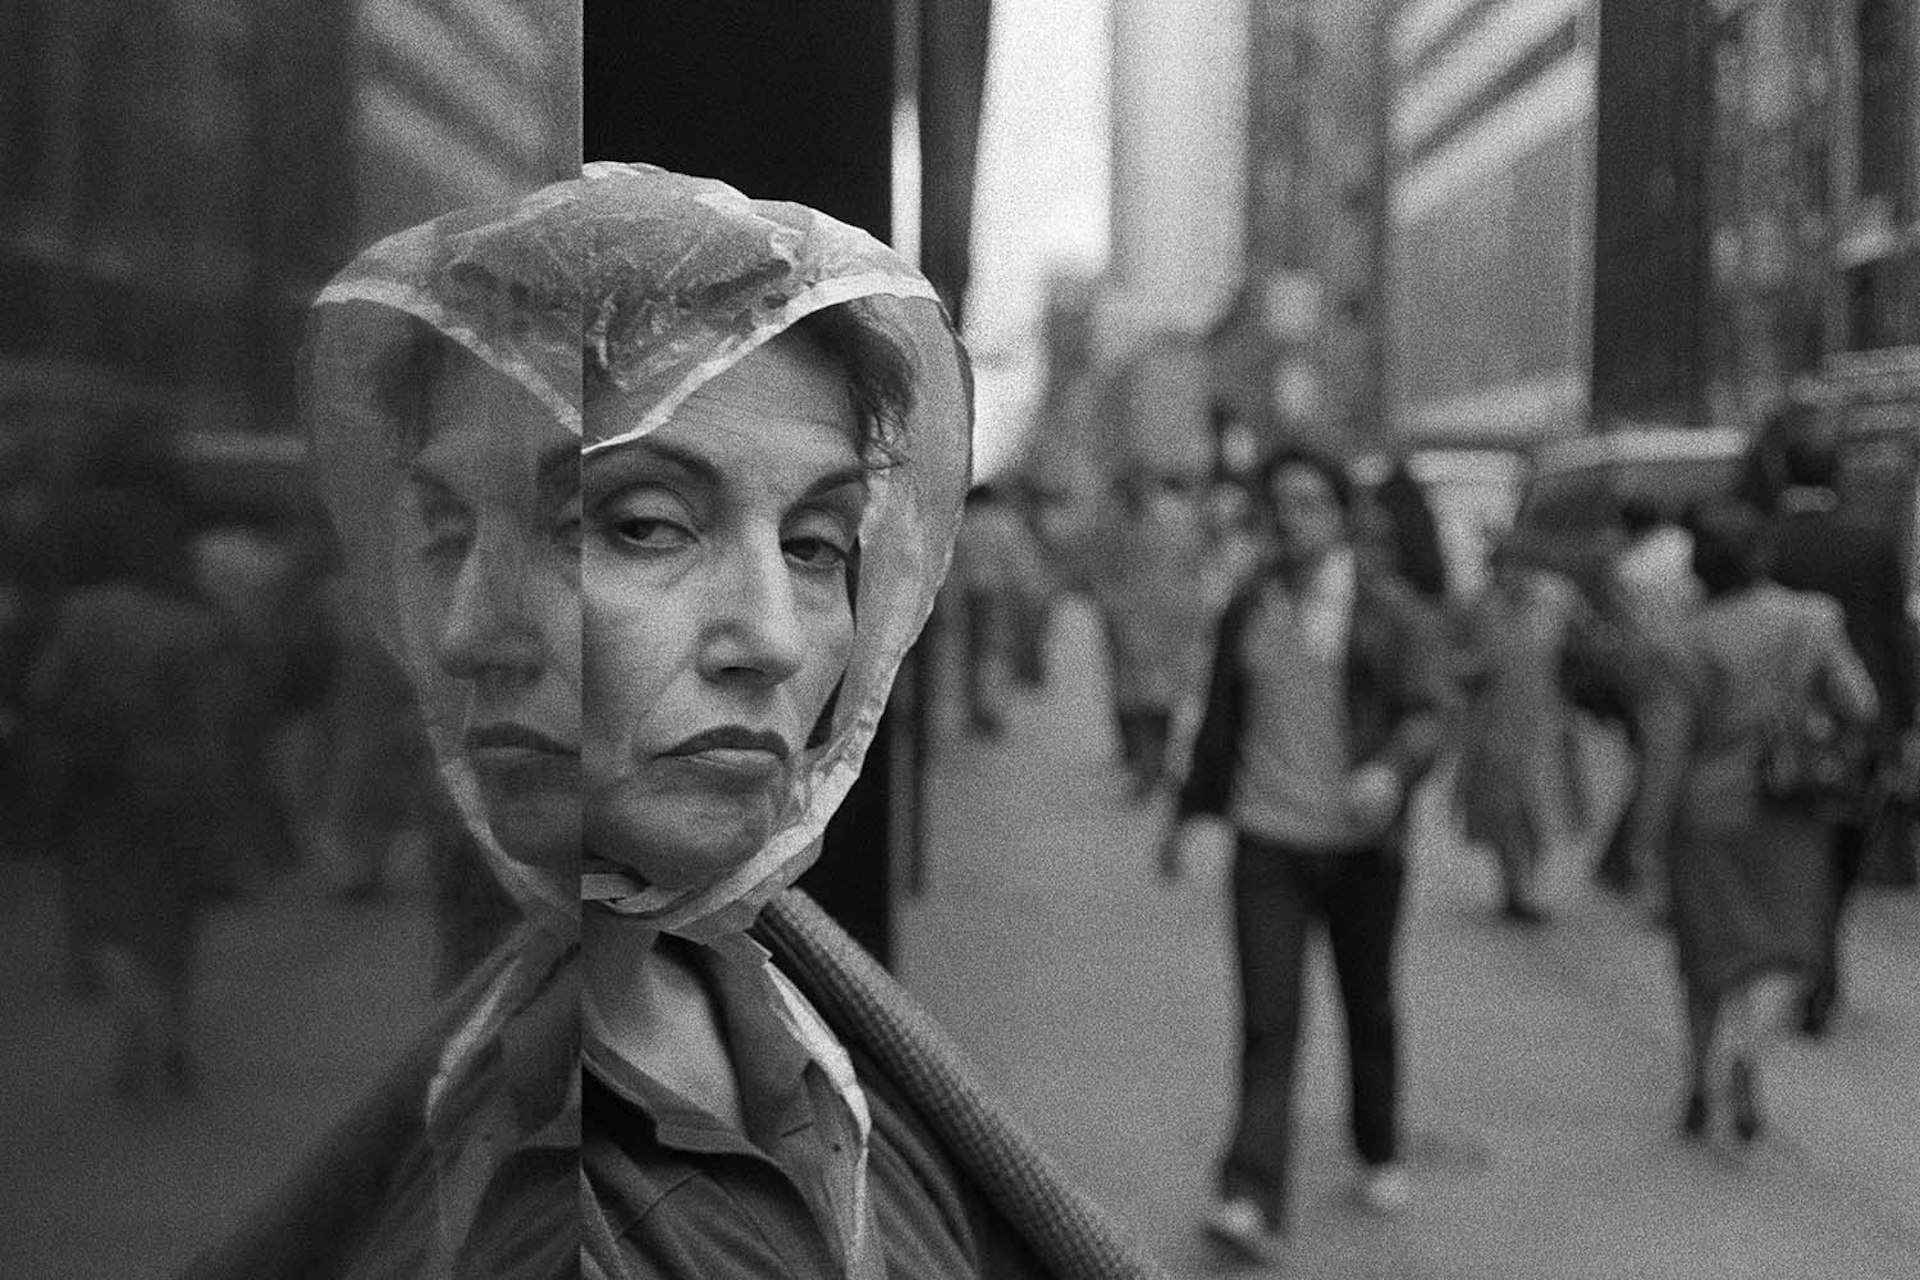 Two Faces, 5th Ave., NYC, 1989